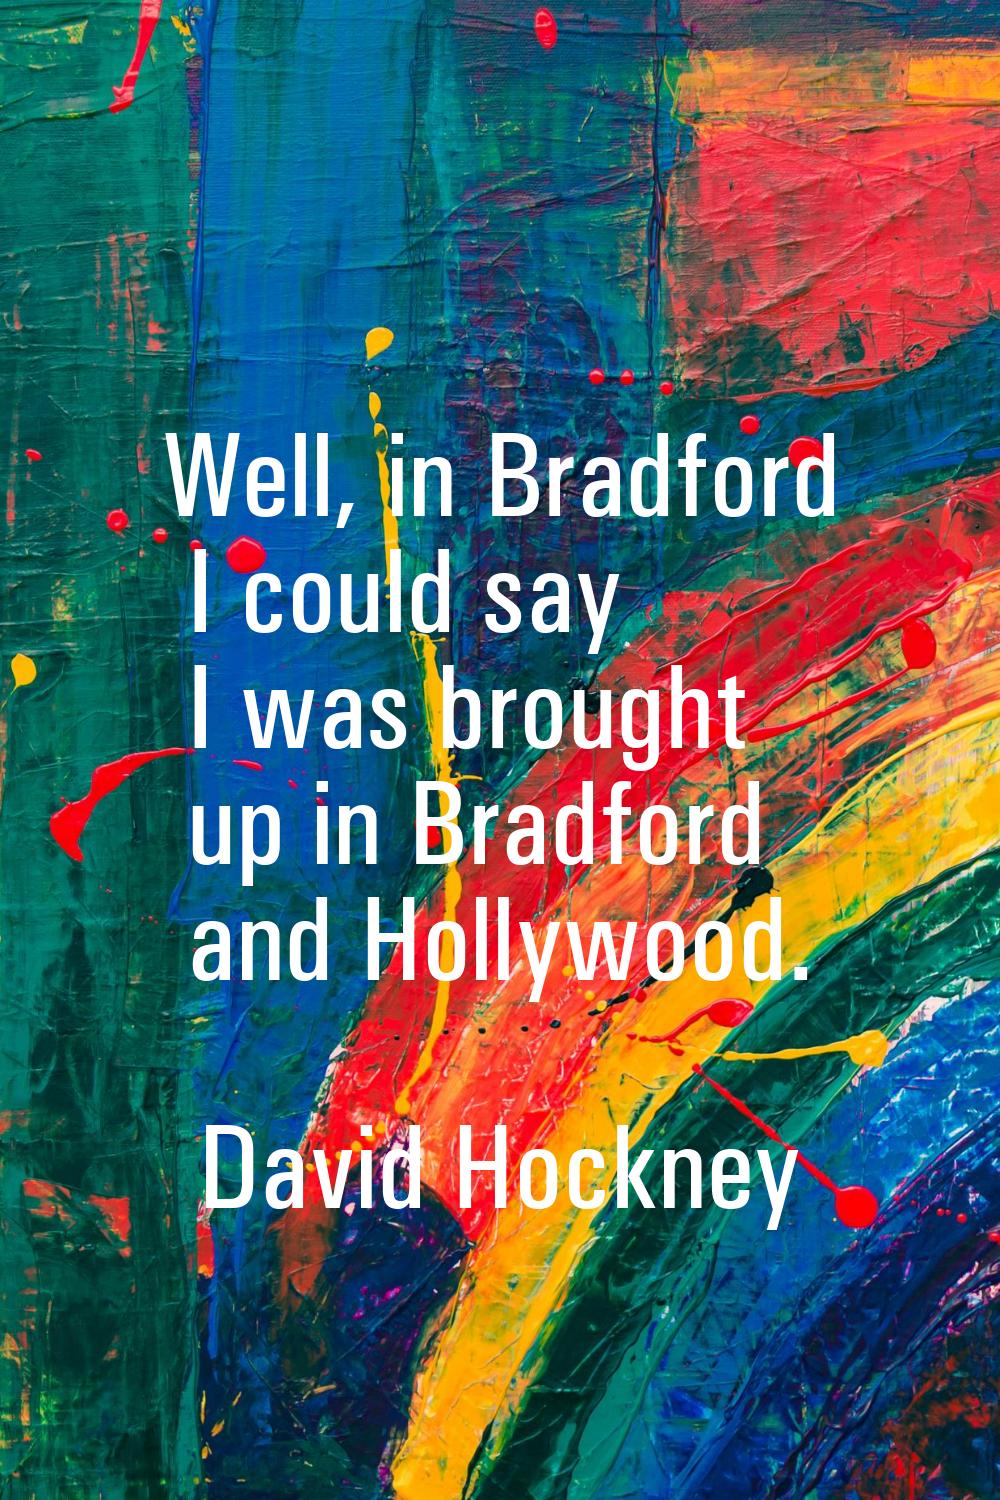 Well, in Bradford I could say I was brought up in Bradford and Hollywood.